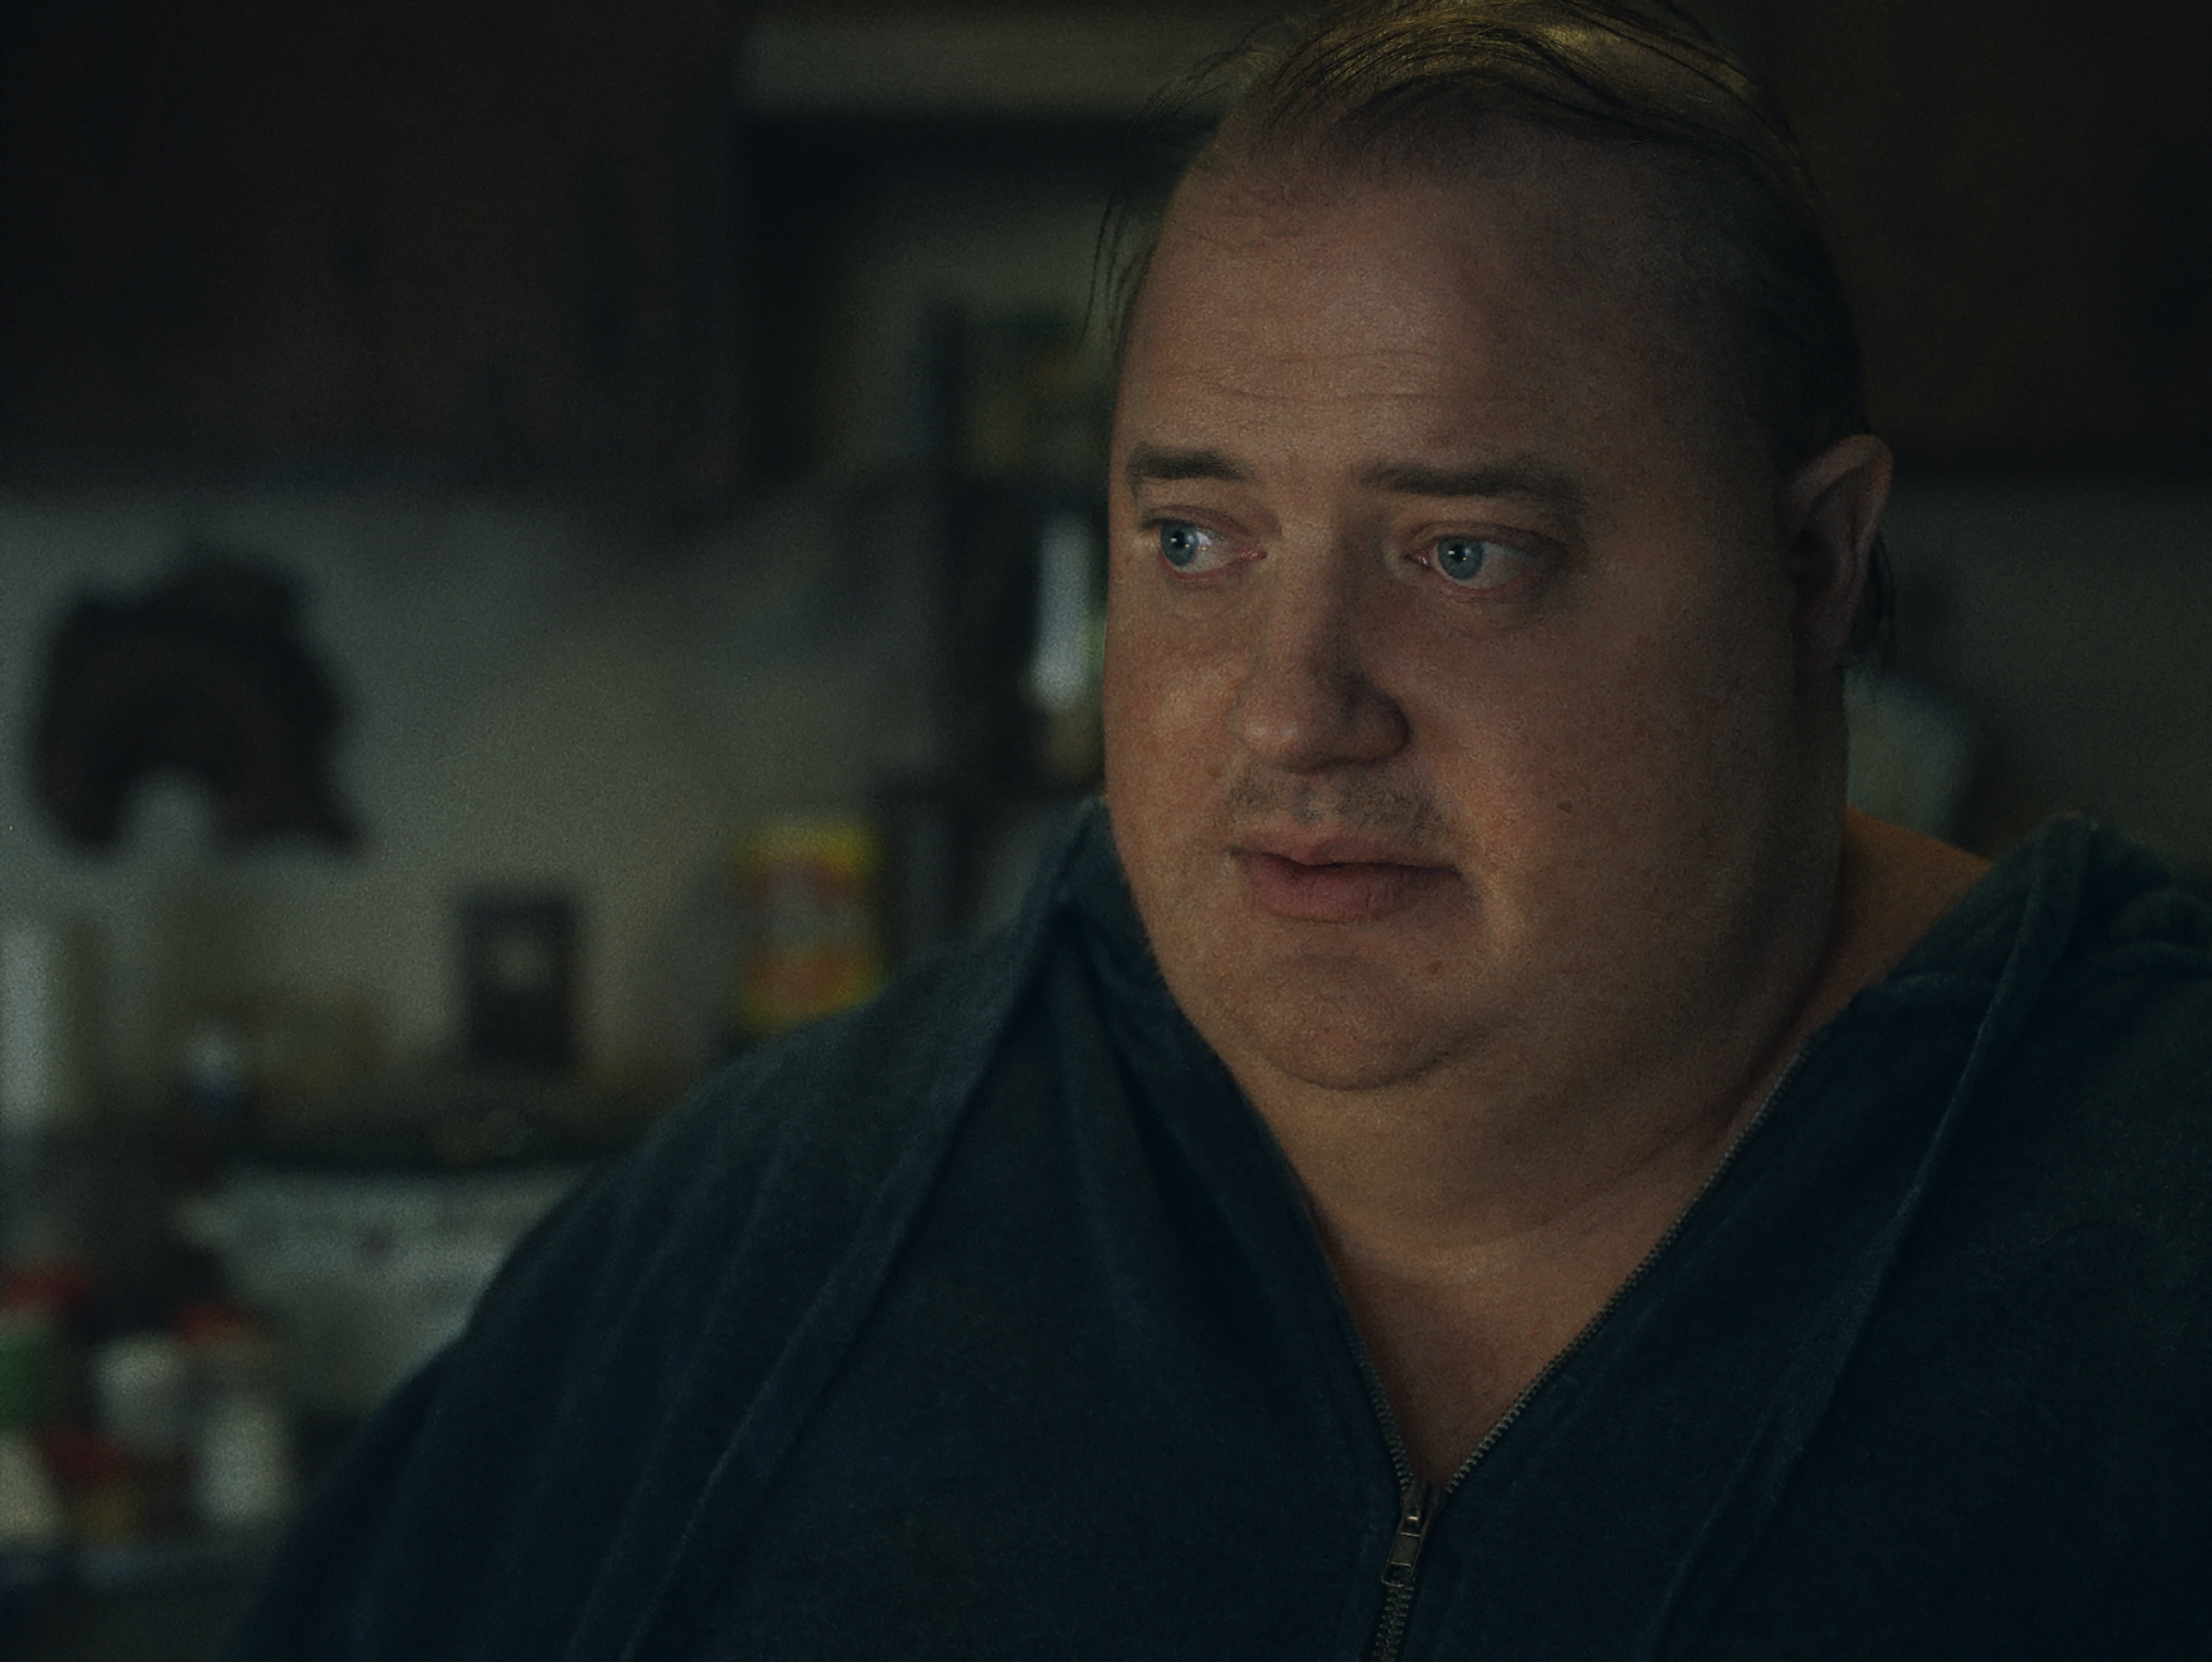 Brendan Fraser gives a moving performance in 'The Whale' (Courtesy of A24)